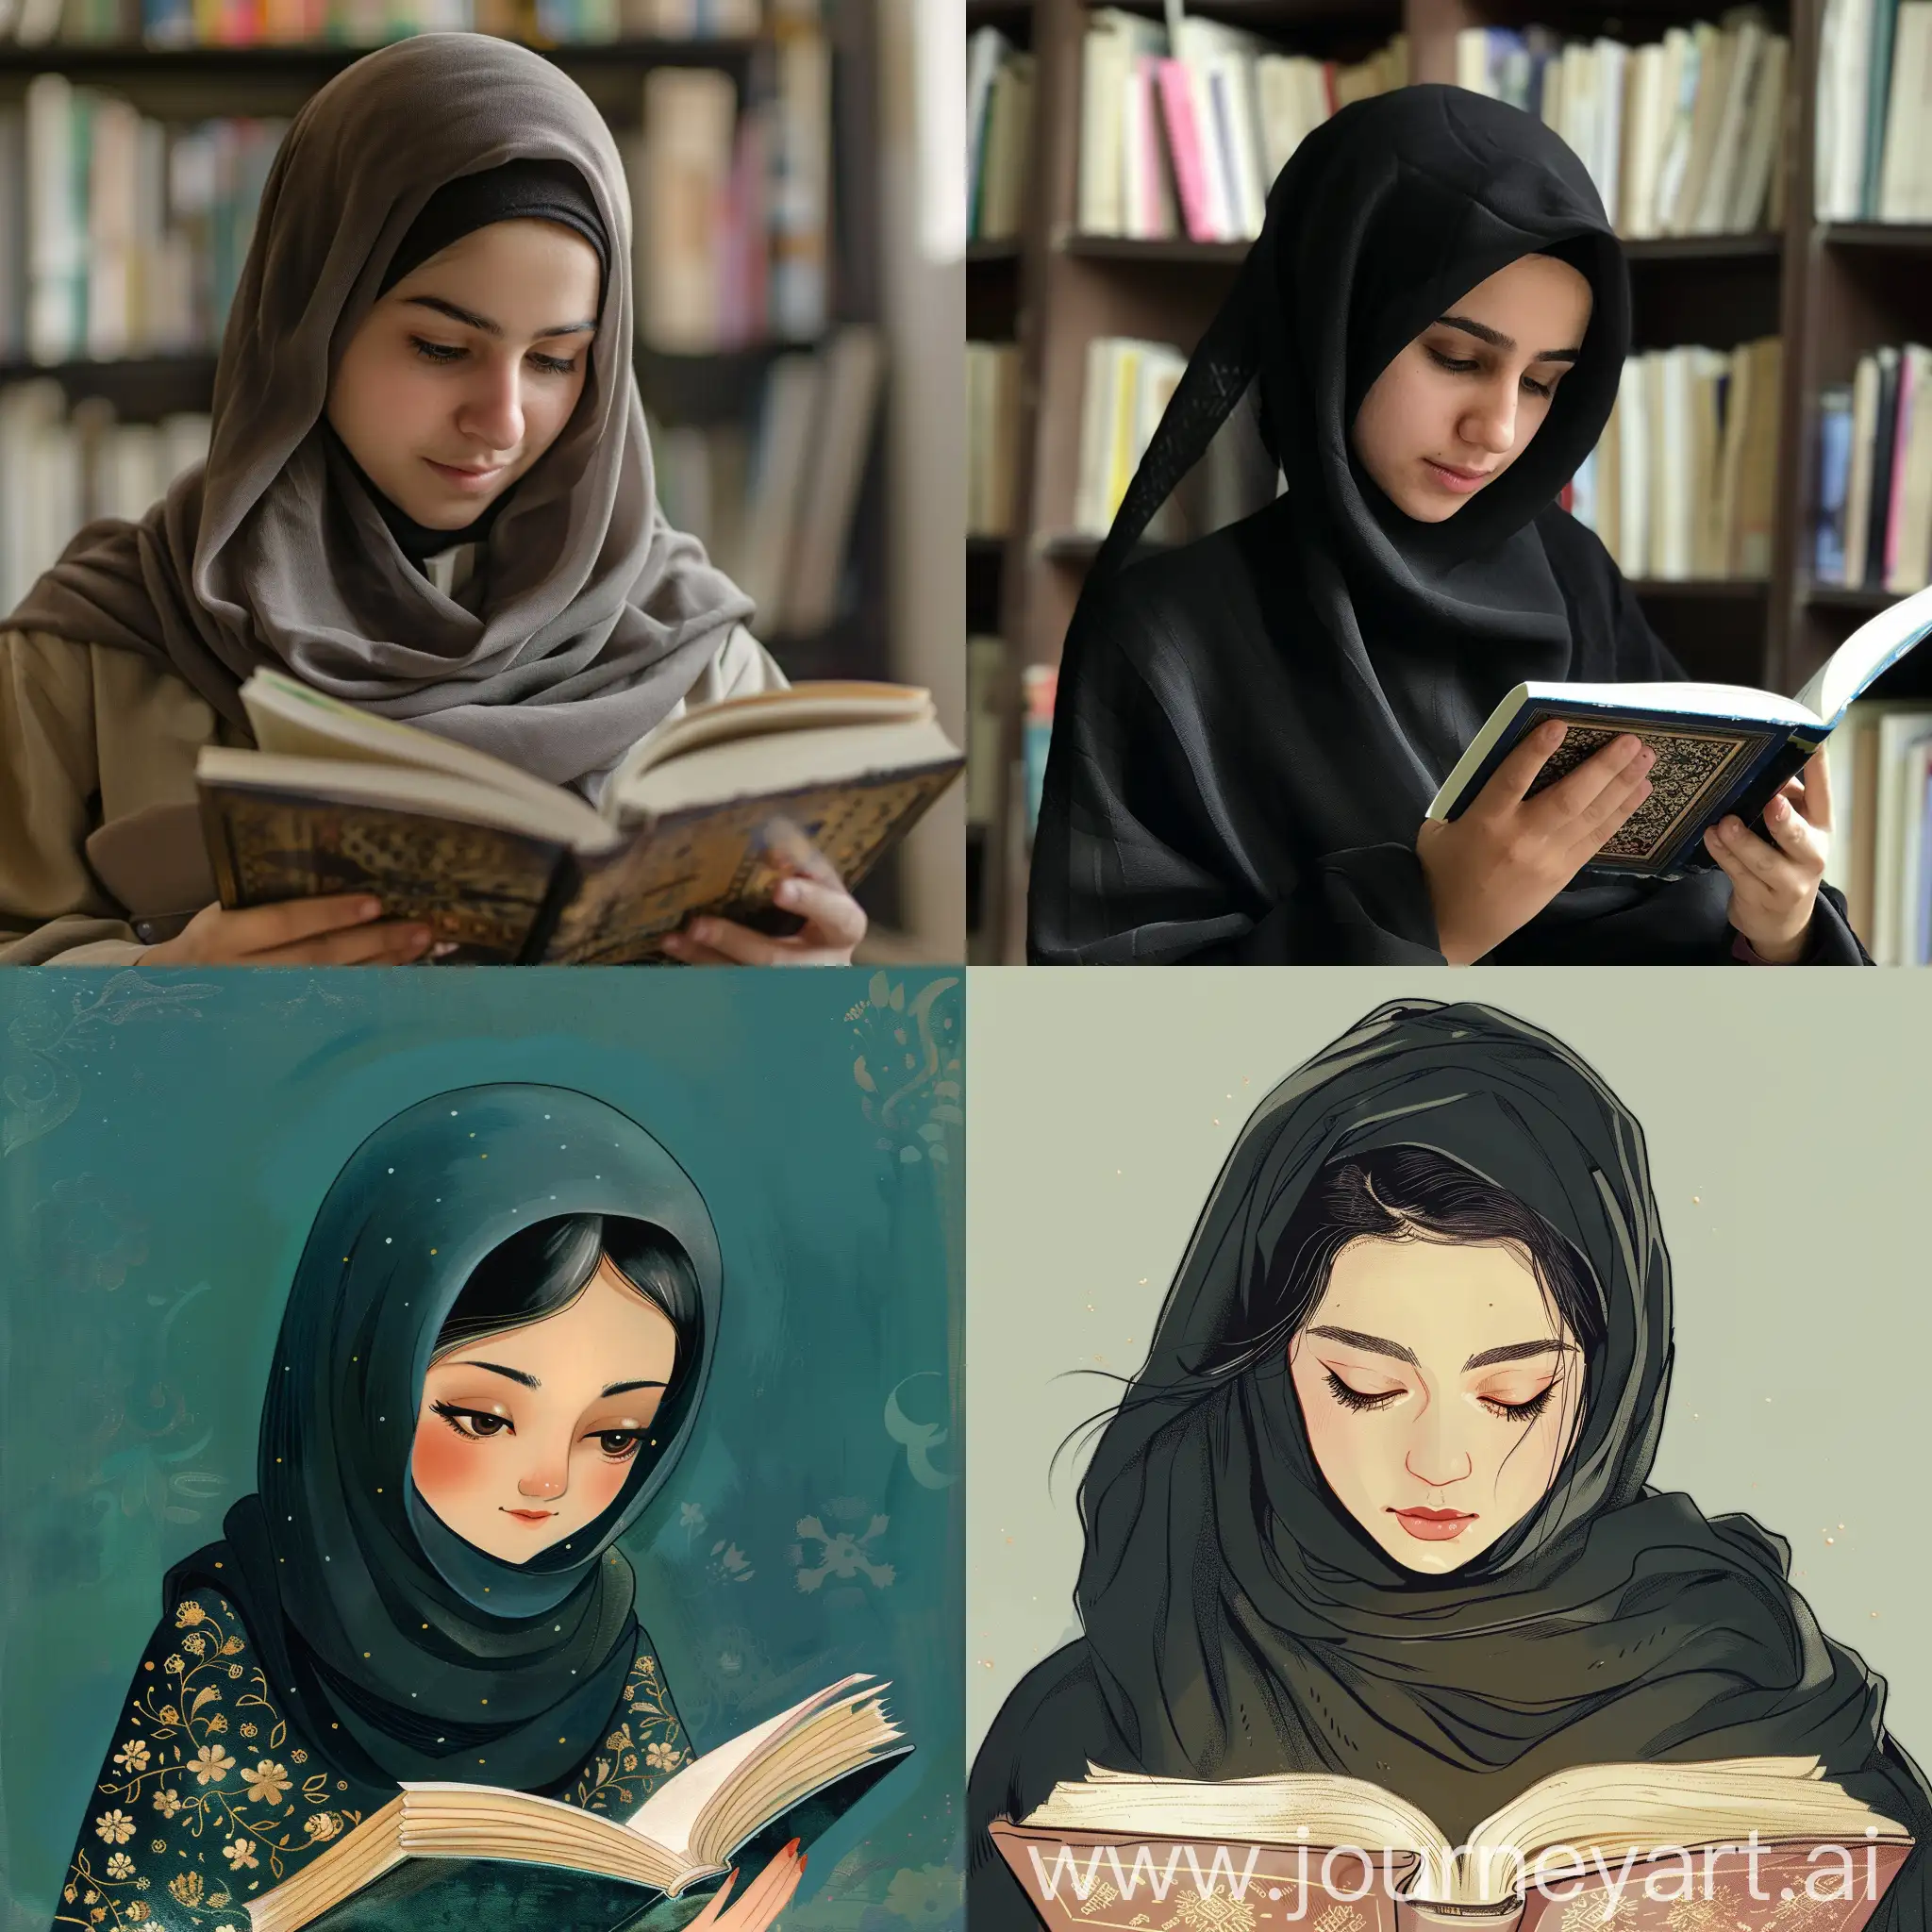 Iranian girl with hijab who is reading a book